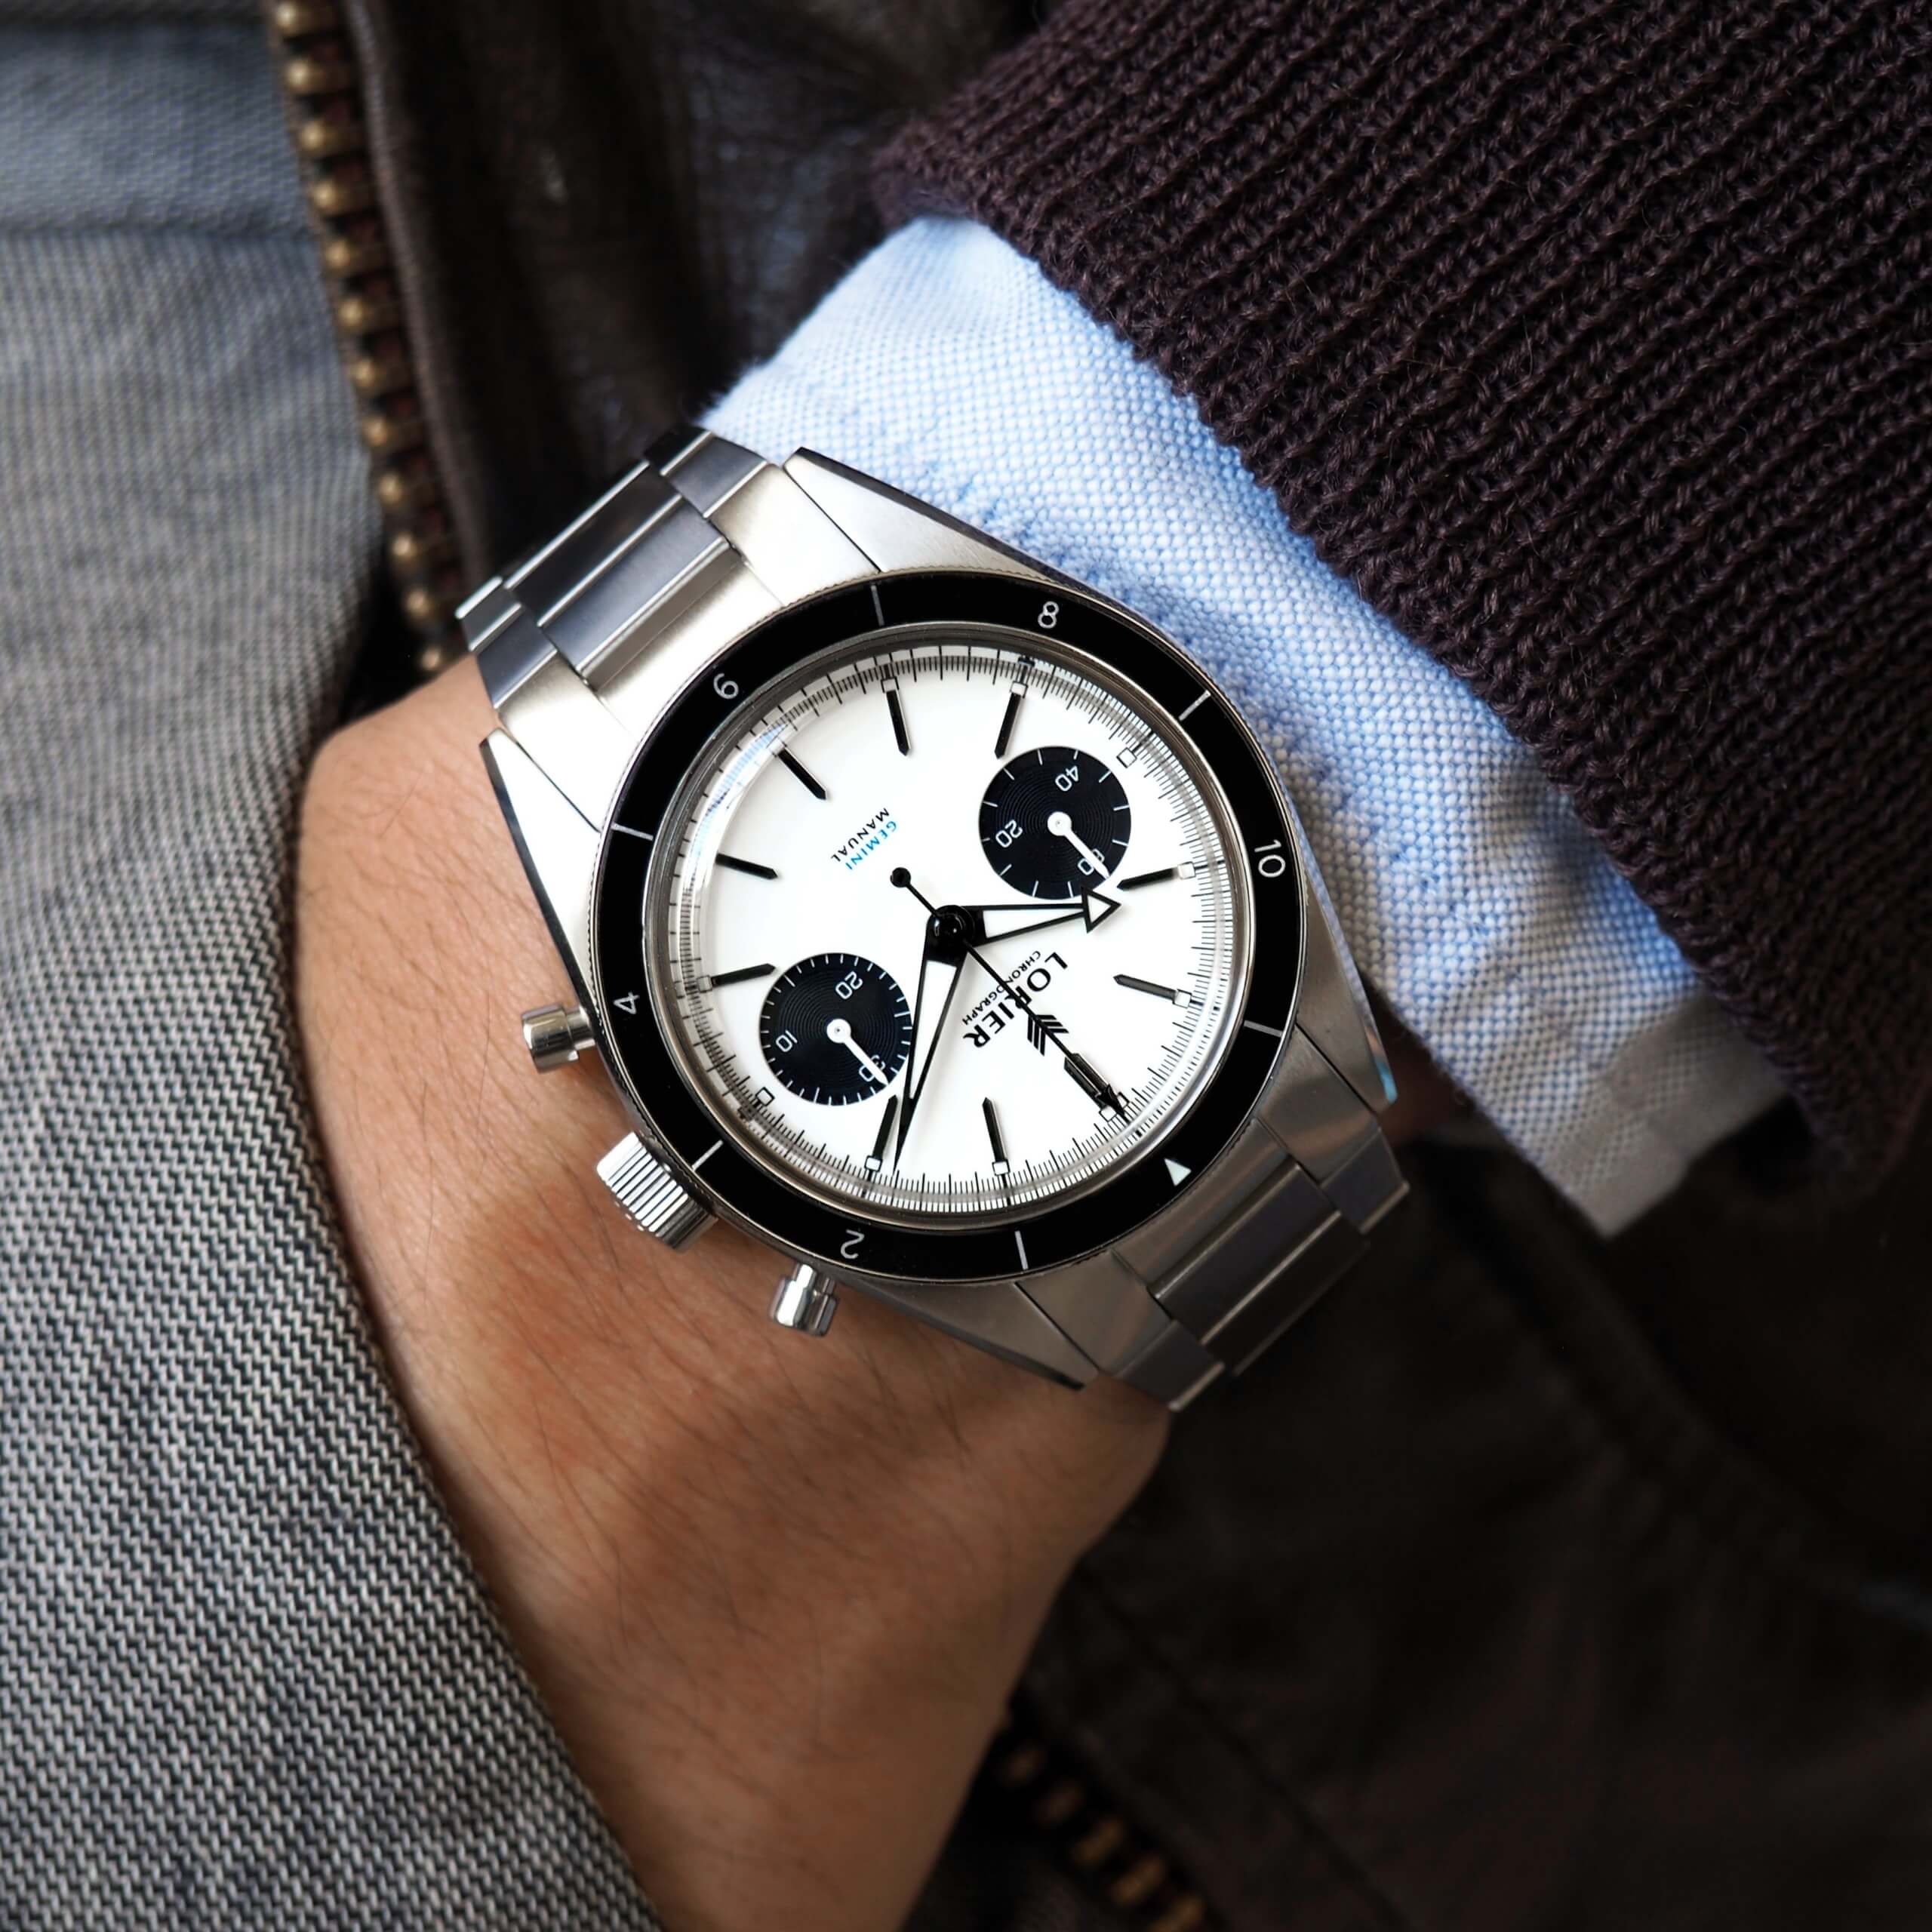 Lorier timepiece with a white dial.